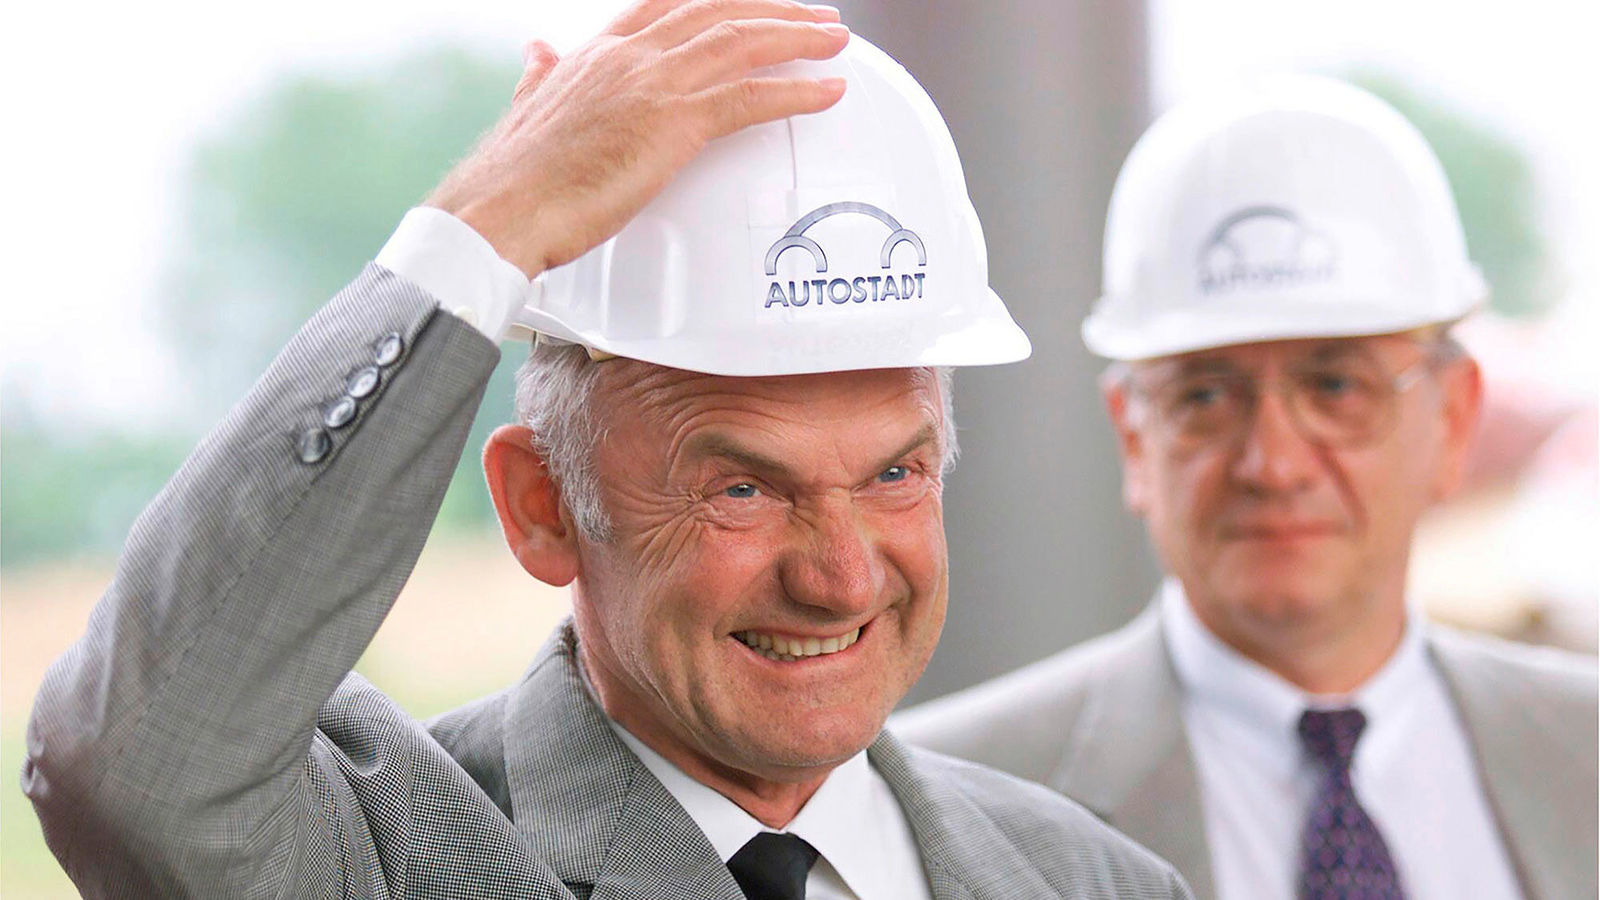 Prof. Dr. Ferdinand Piëch: “All I ever wanted to do was build cars”